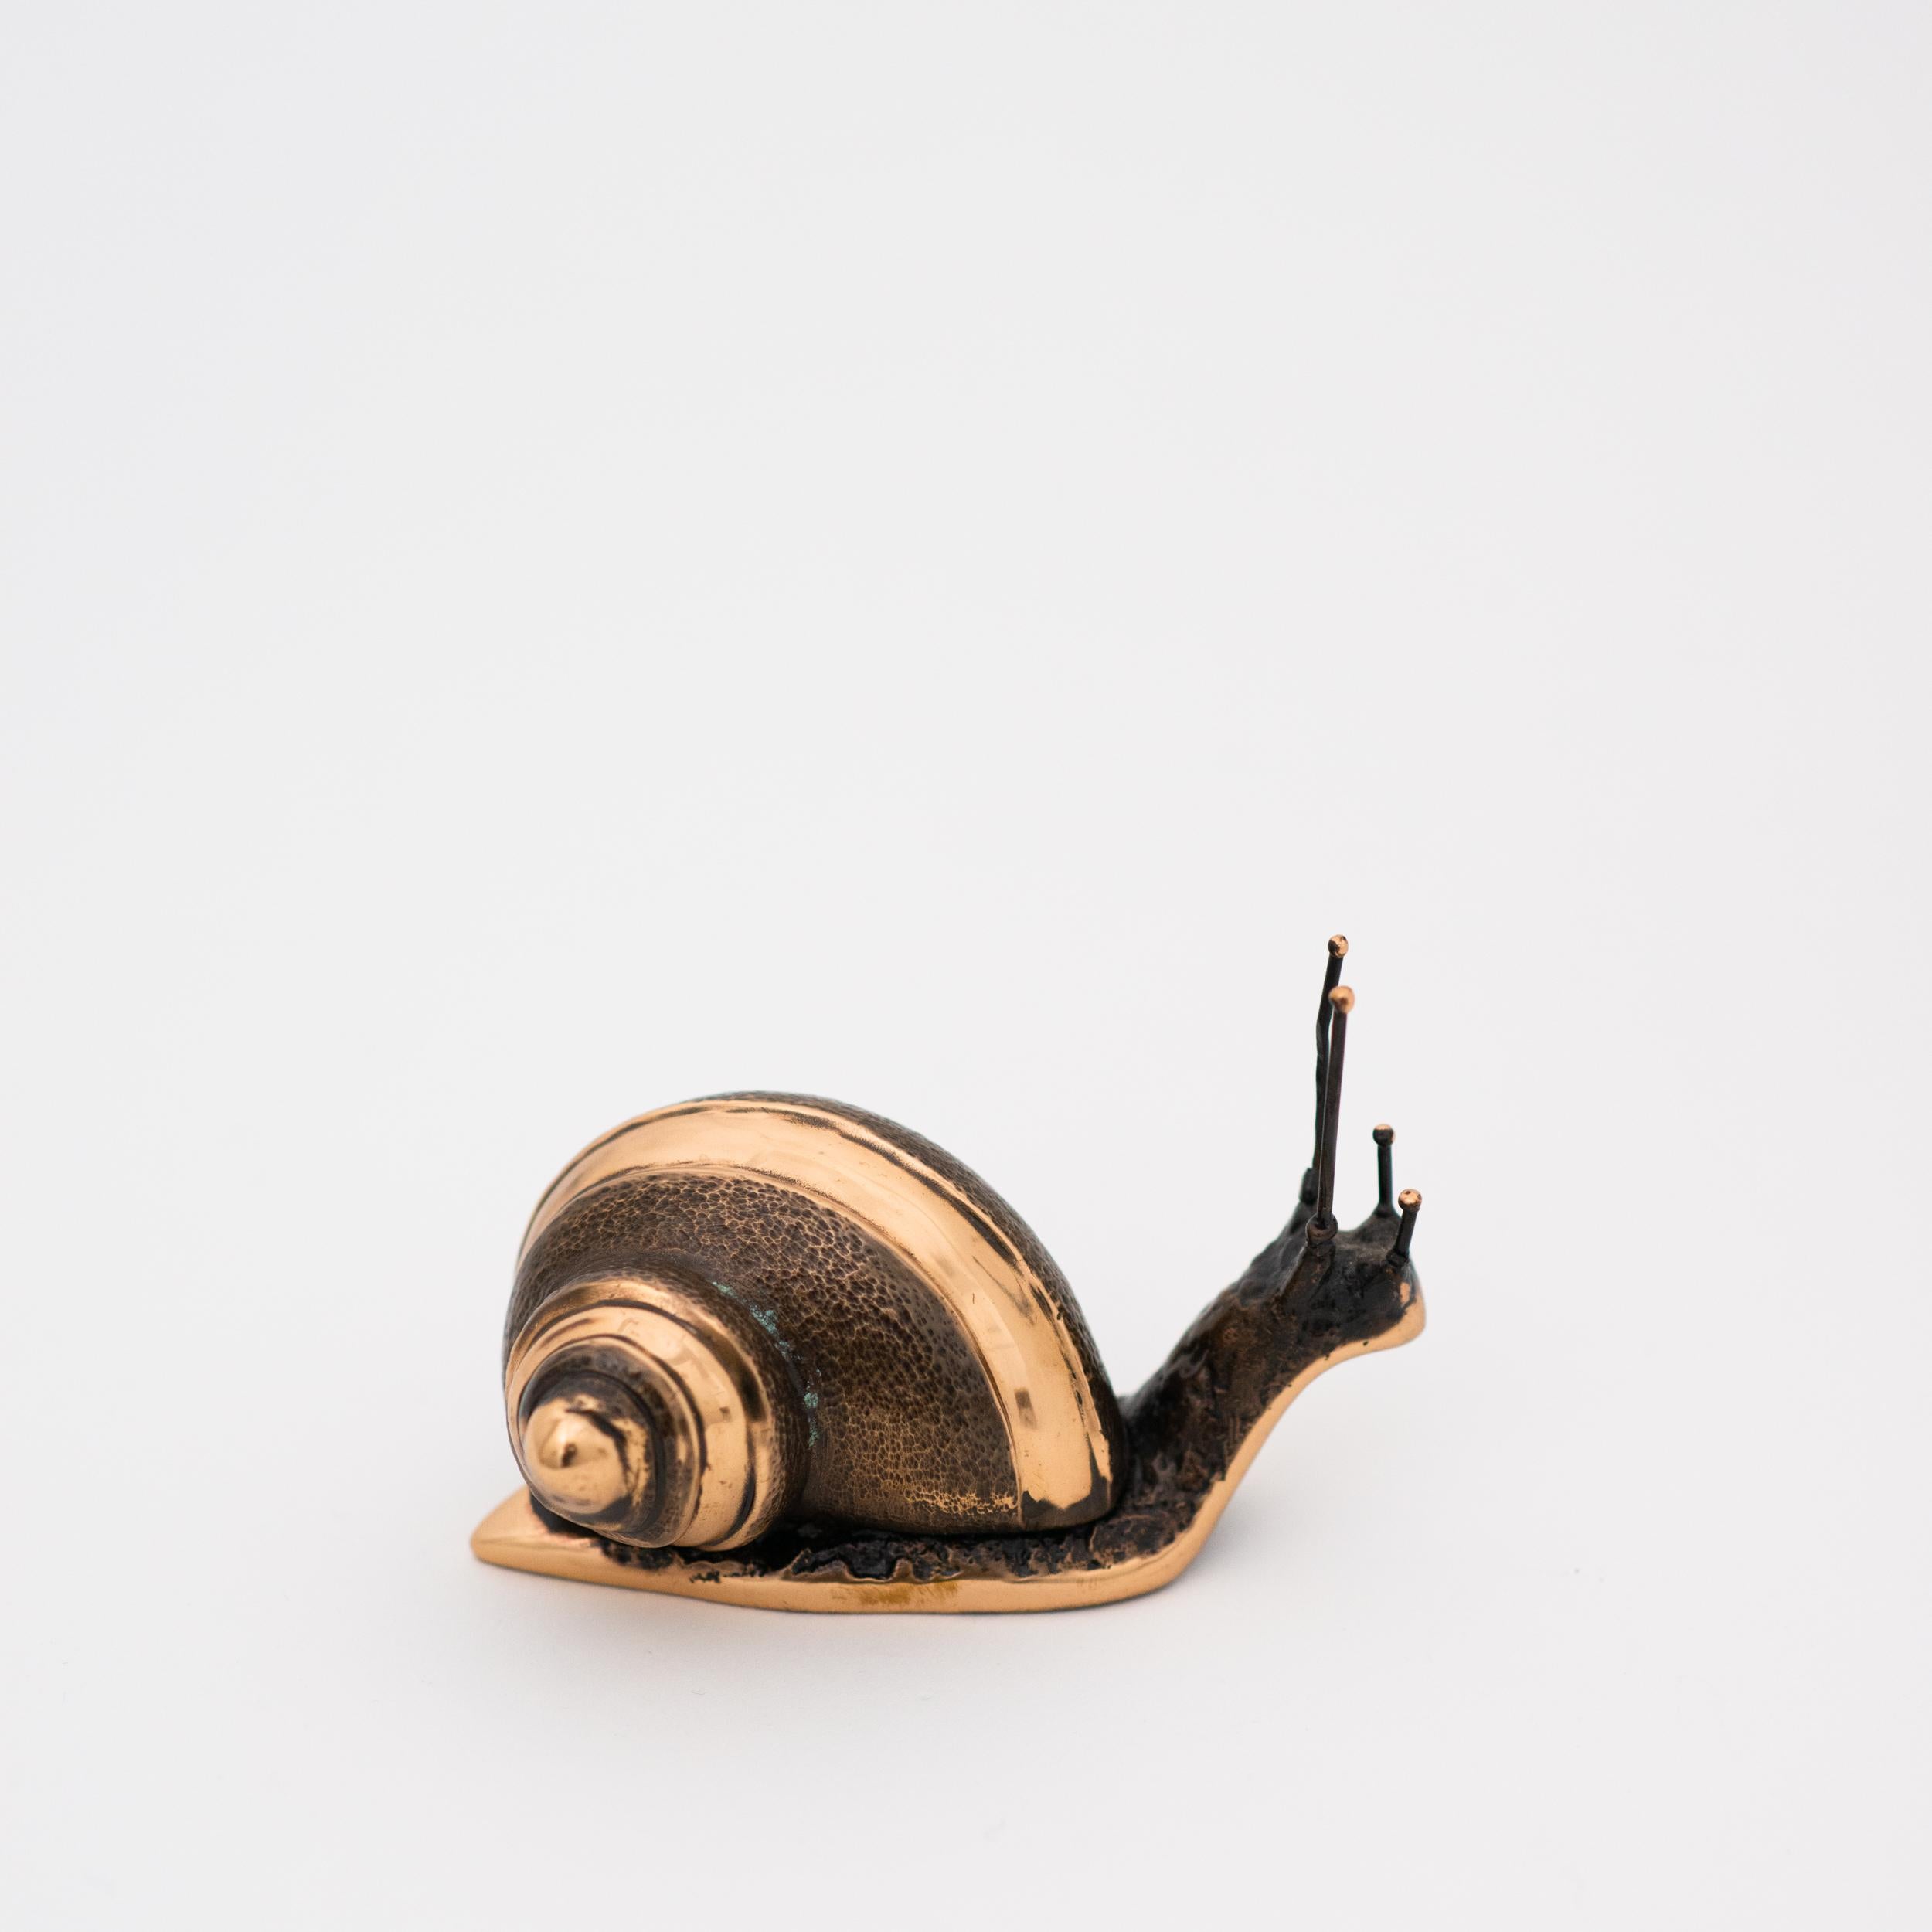 Indian Handmade Cast Bronze Decorative Snail Large Paperweight For Sale